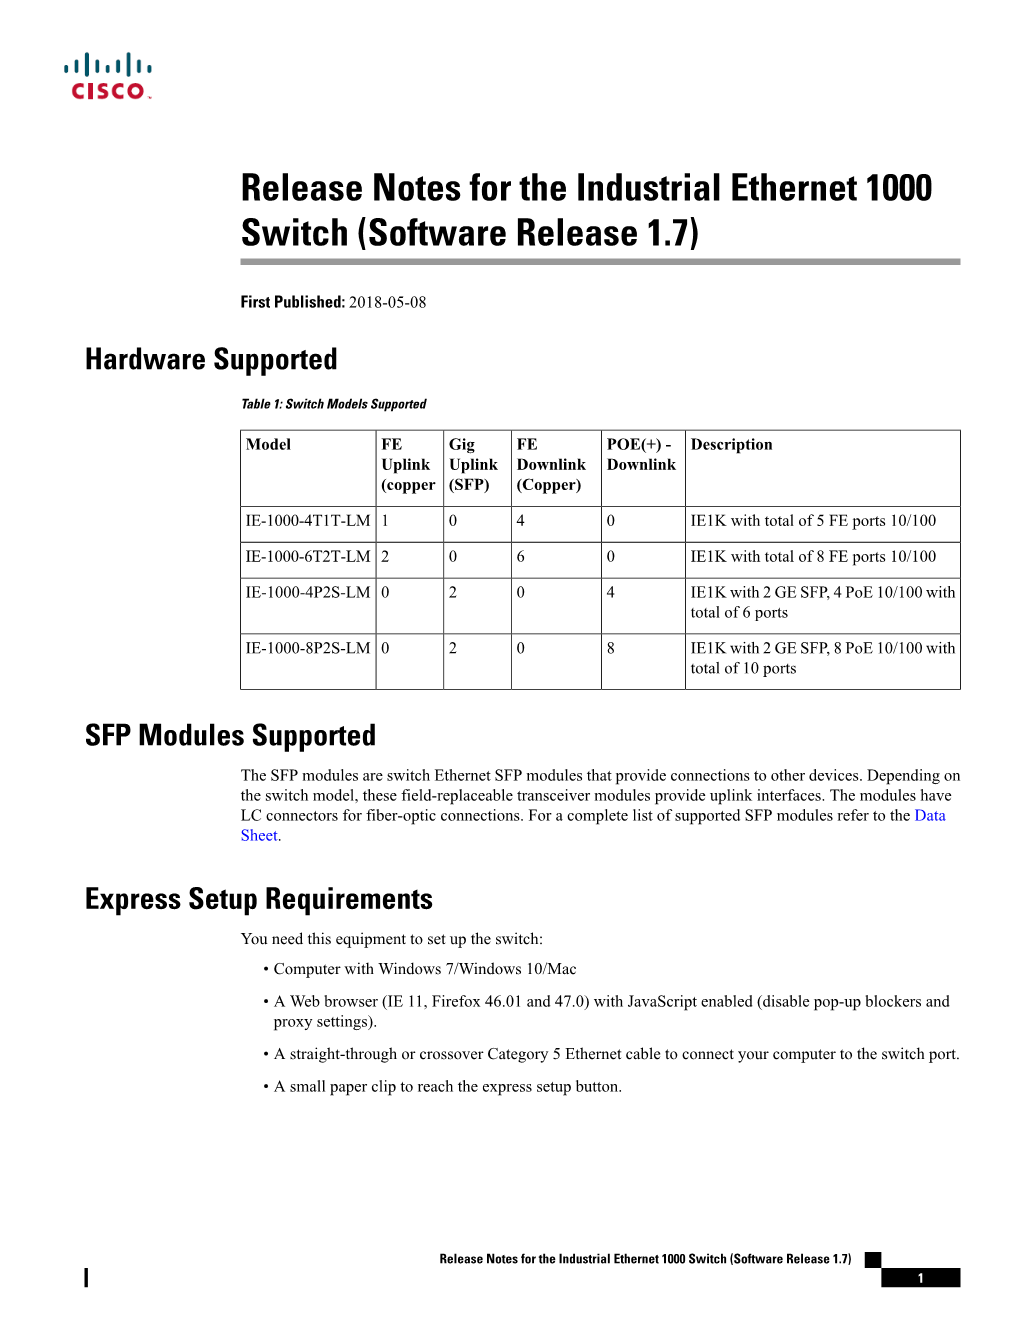 Release Notes for the Industrial Ethernet 1000 Switch (Software Release 1.7)